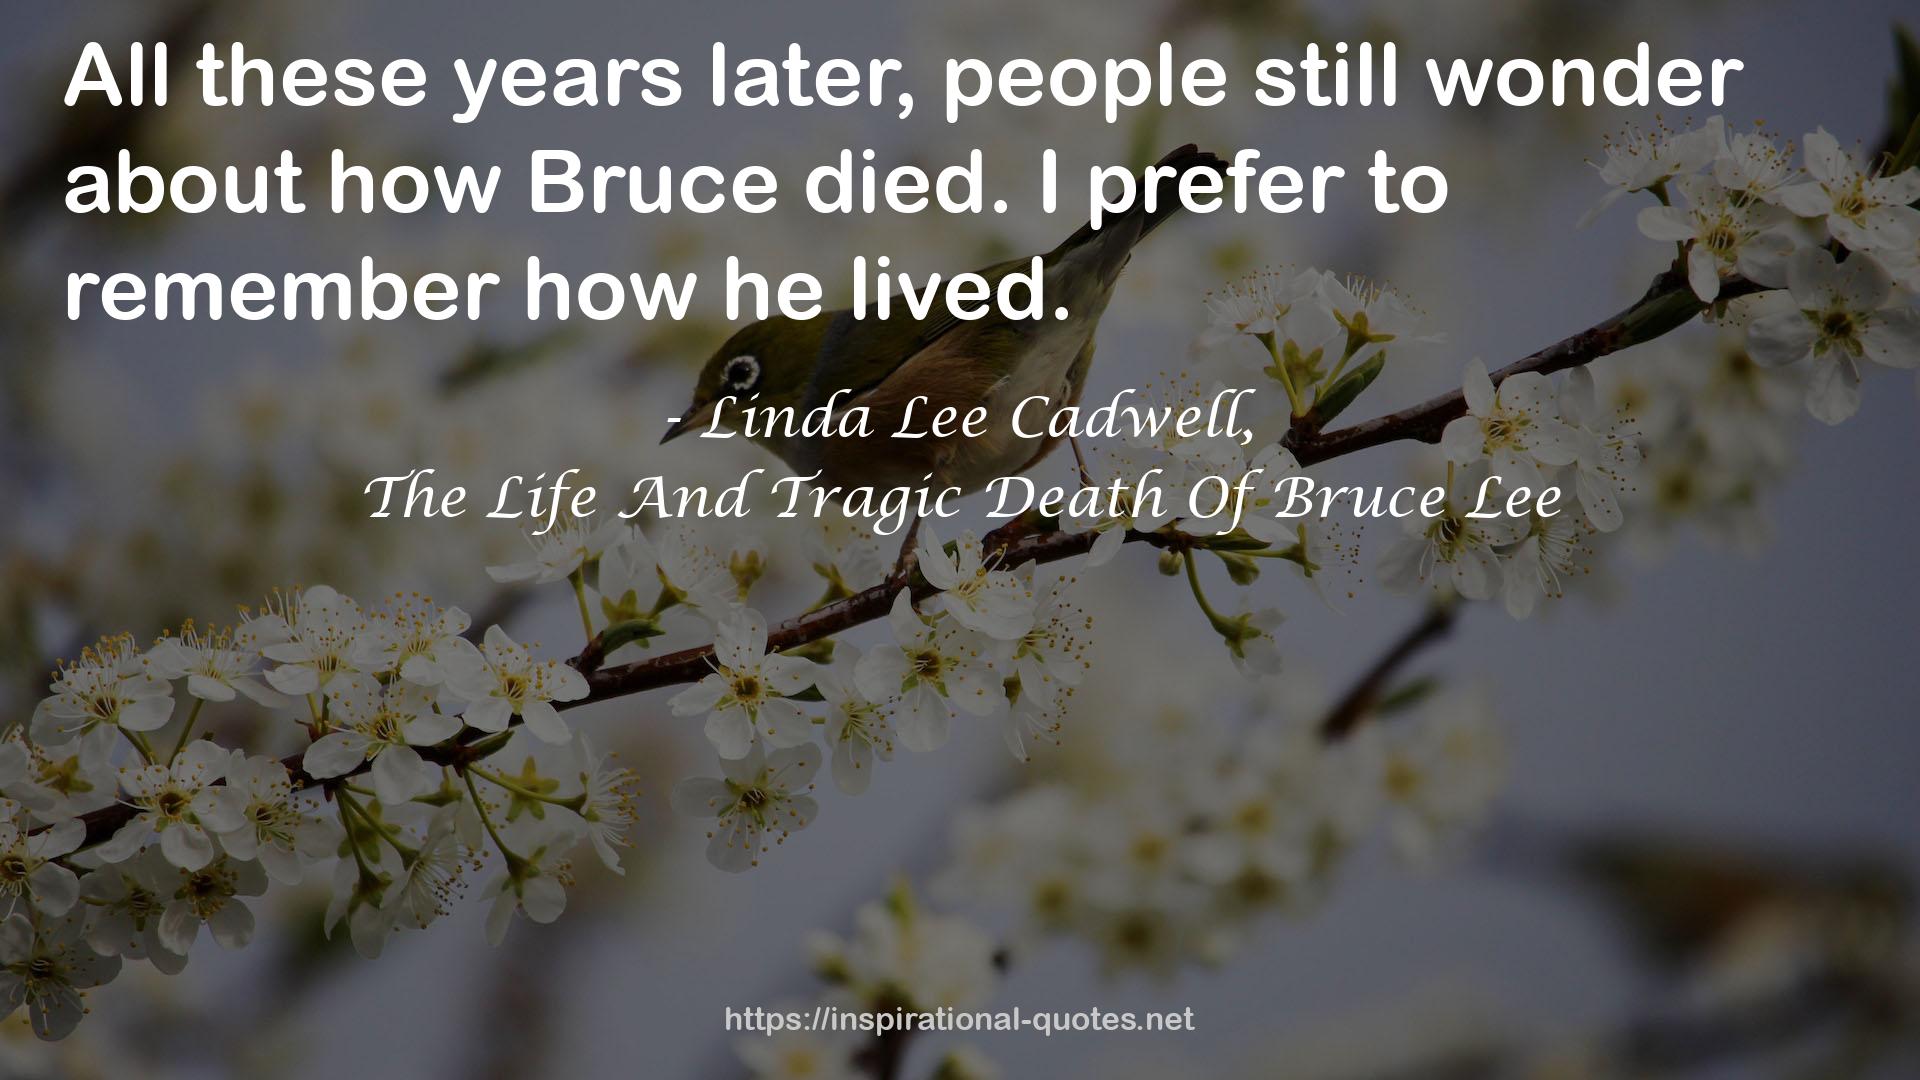 The Life And Tragic Death Of Bruce Lee QUOTES